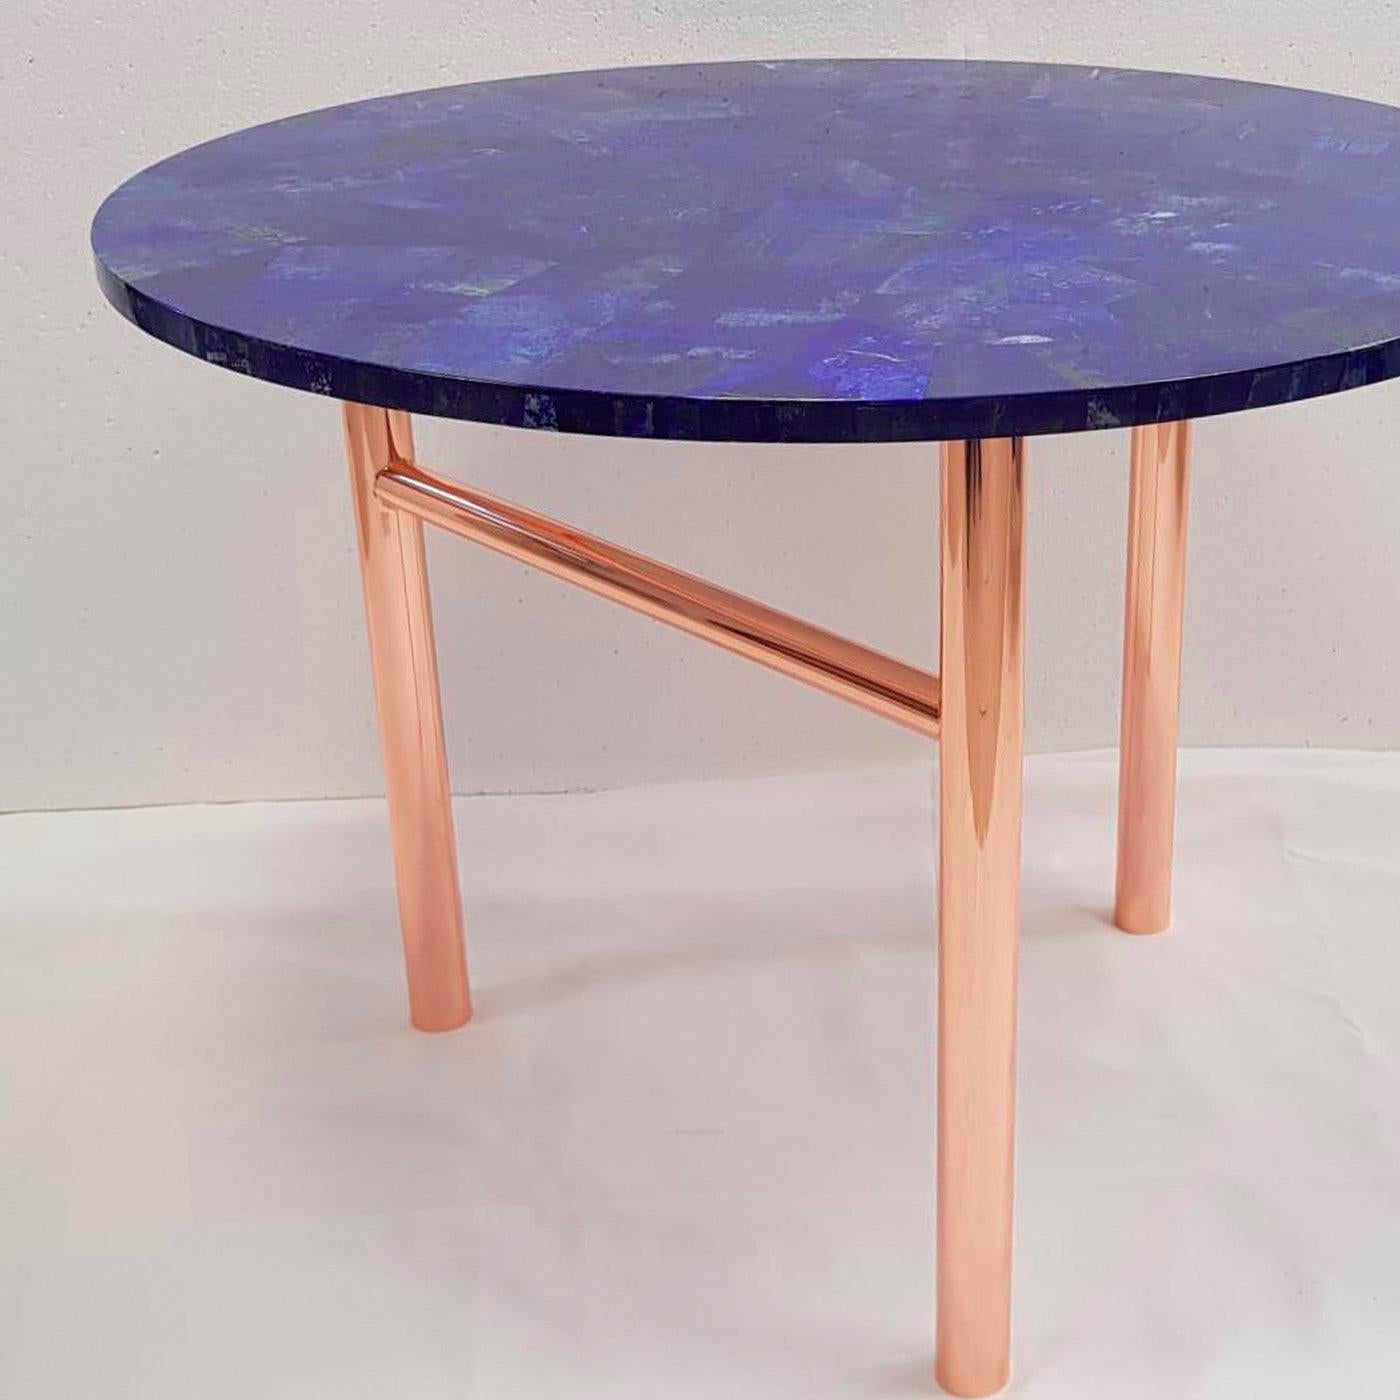 Manufactured through a mosaic technique that combines thin layers of precious lapis lazuli's hard stone to create this opaque and intense-blue round top, this table features a luxurious and refined personality. The luminous tubular base in brass